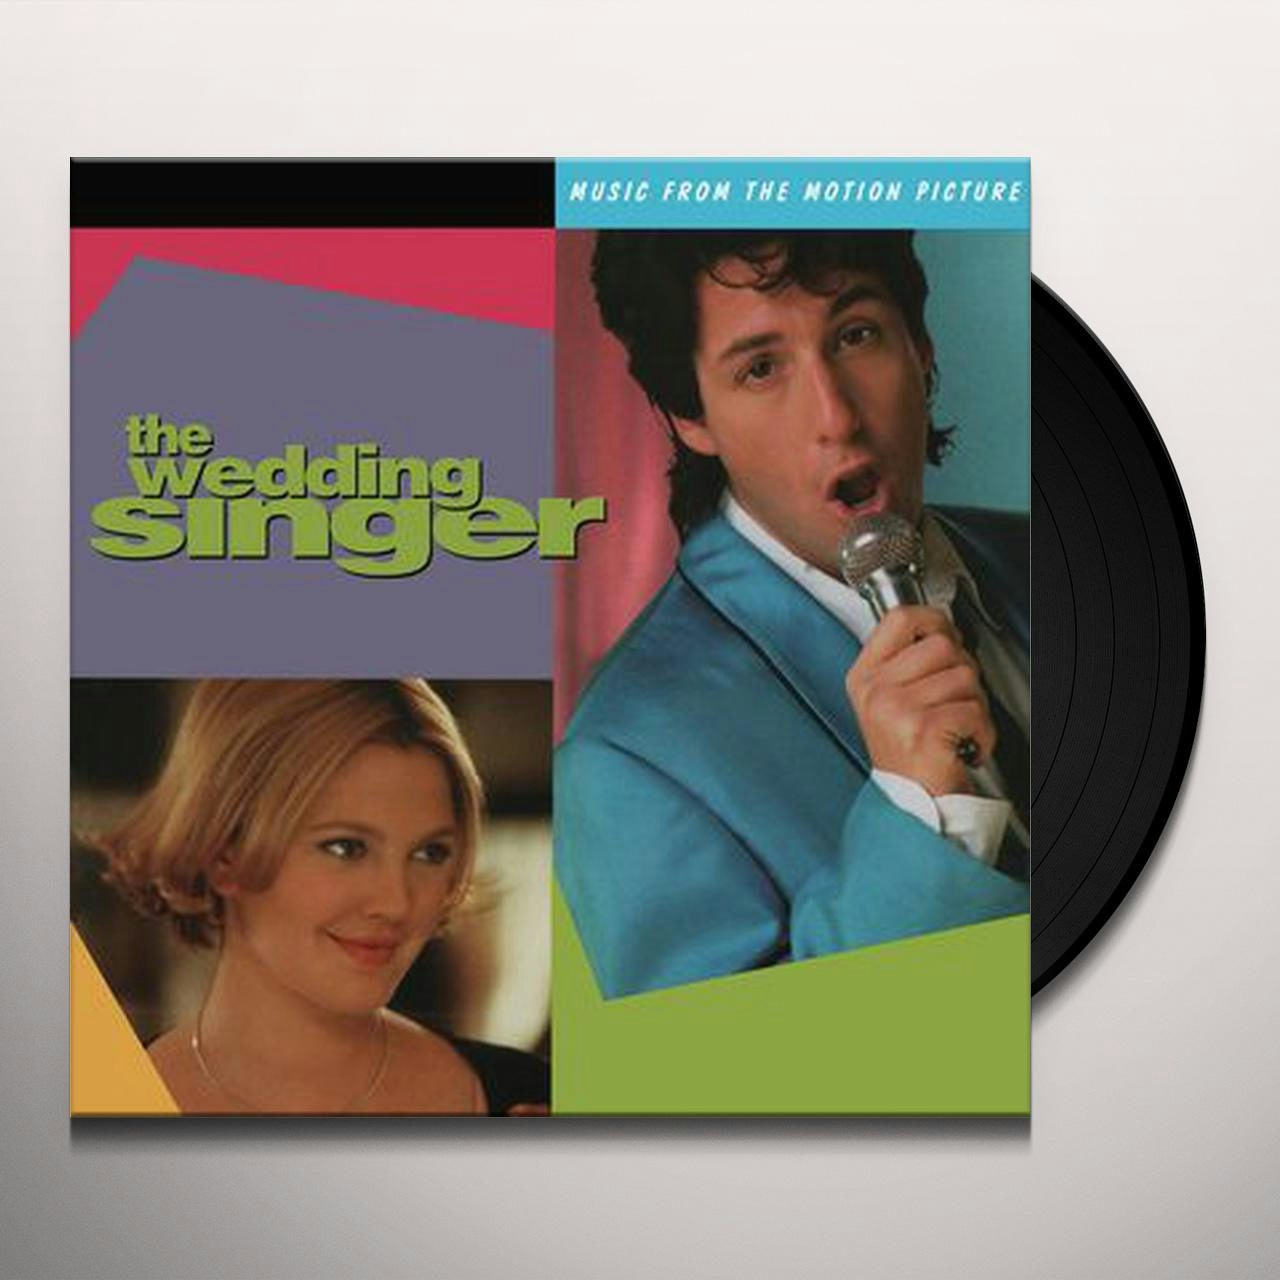 wedding singer (MUSIC FROM THE MOTION PICTURE) Vinyl Record